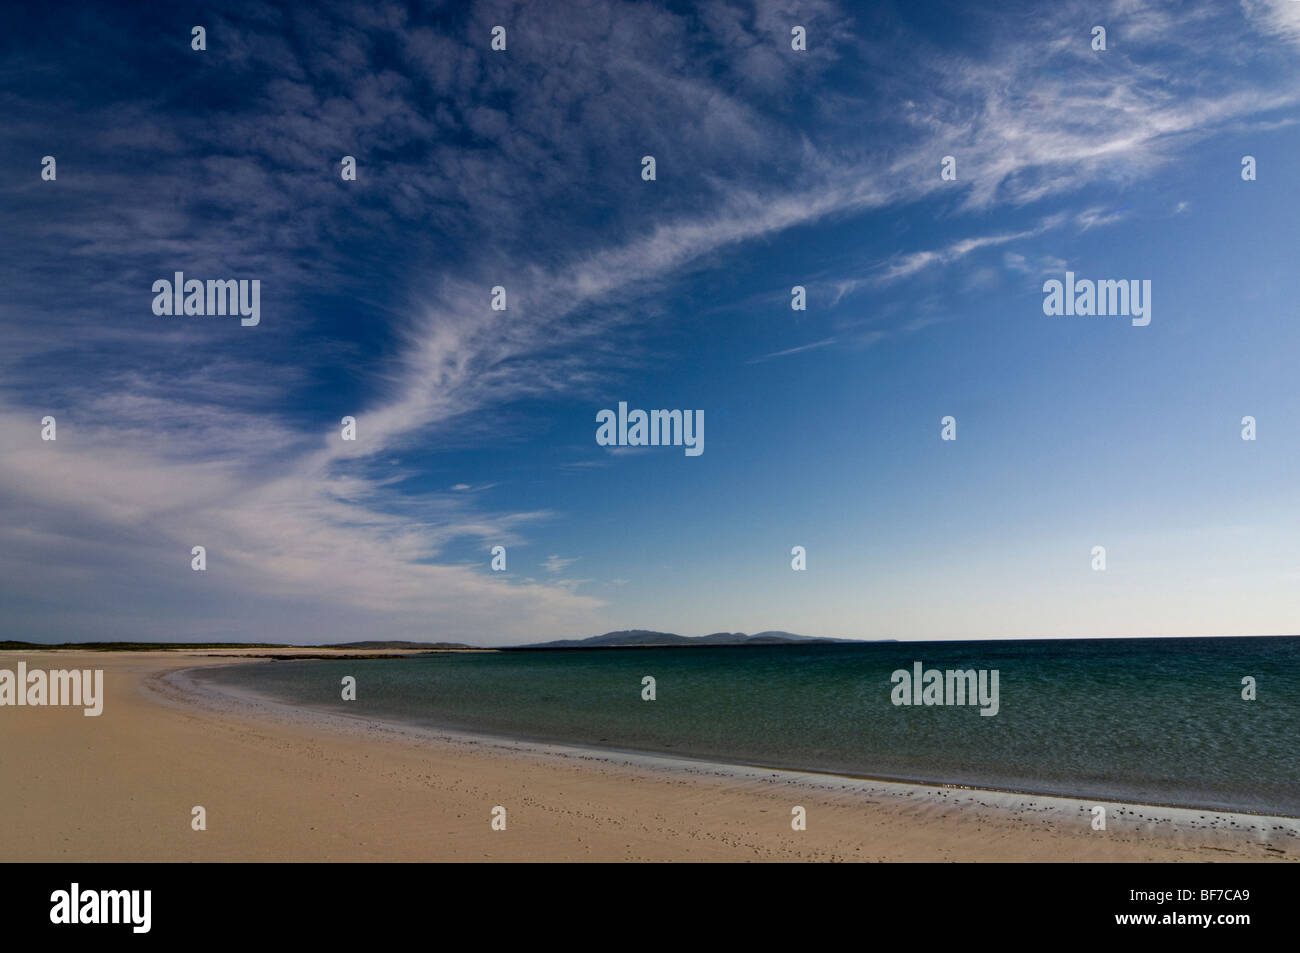 Evening beach view at Pollachar, South Uist looking south, Scotland, UK Stock Photo